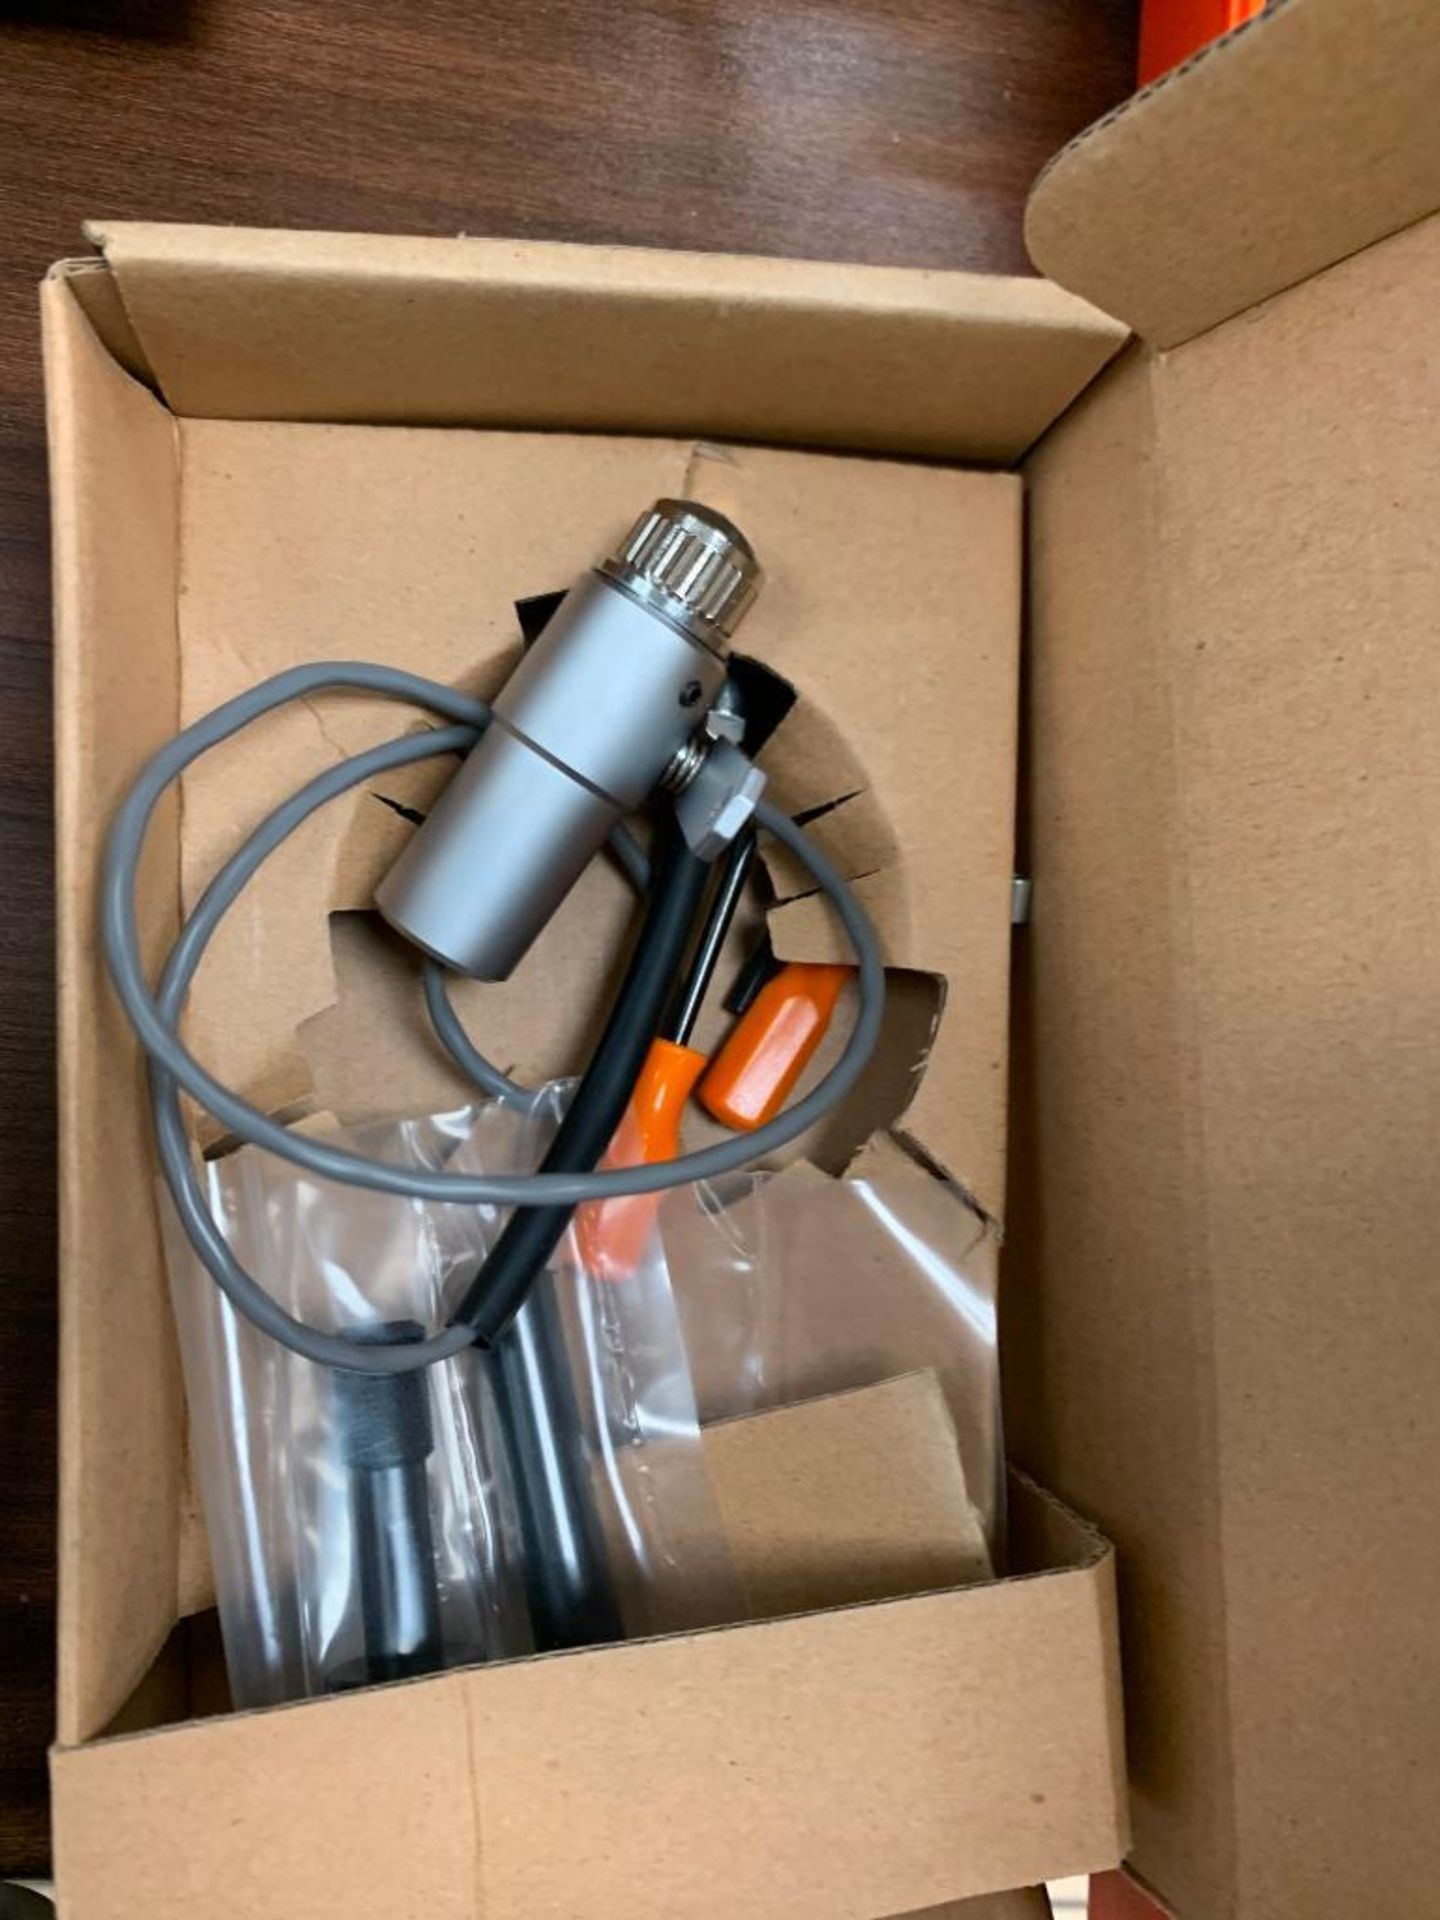 ELECTRIC MICROSCOPE, 15X ZOOM LENS, 2X ADJUSTABLE, WITH LED LIGHT IN BOX - Image 7 of 7